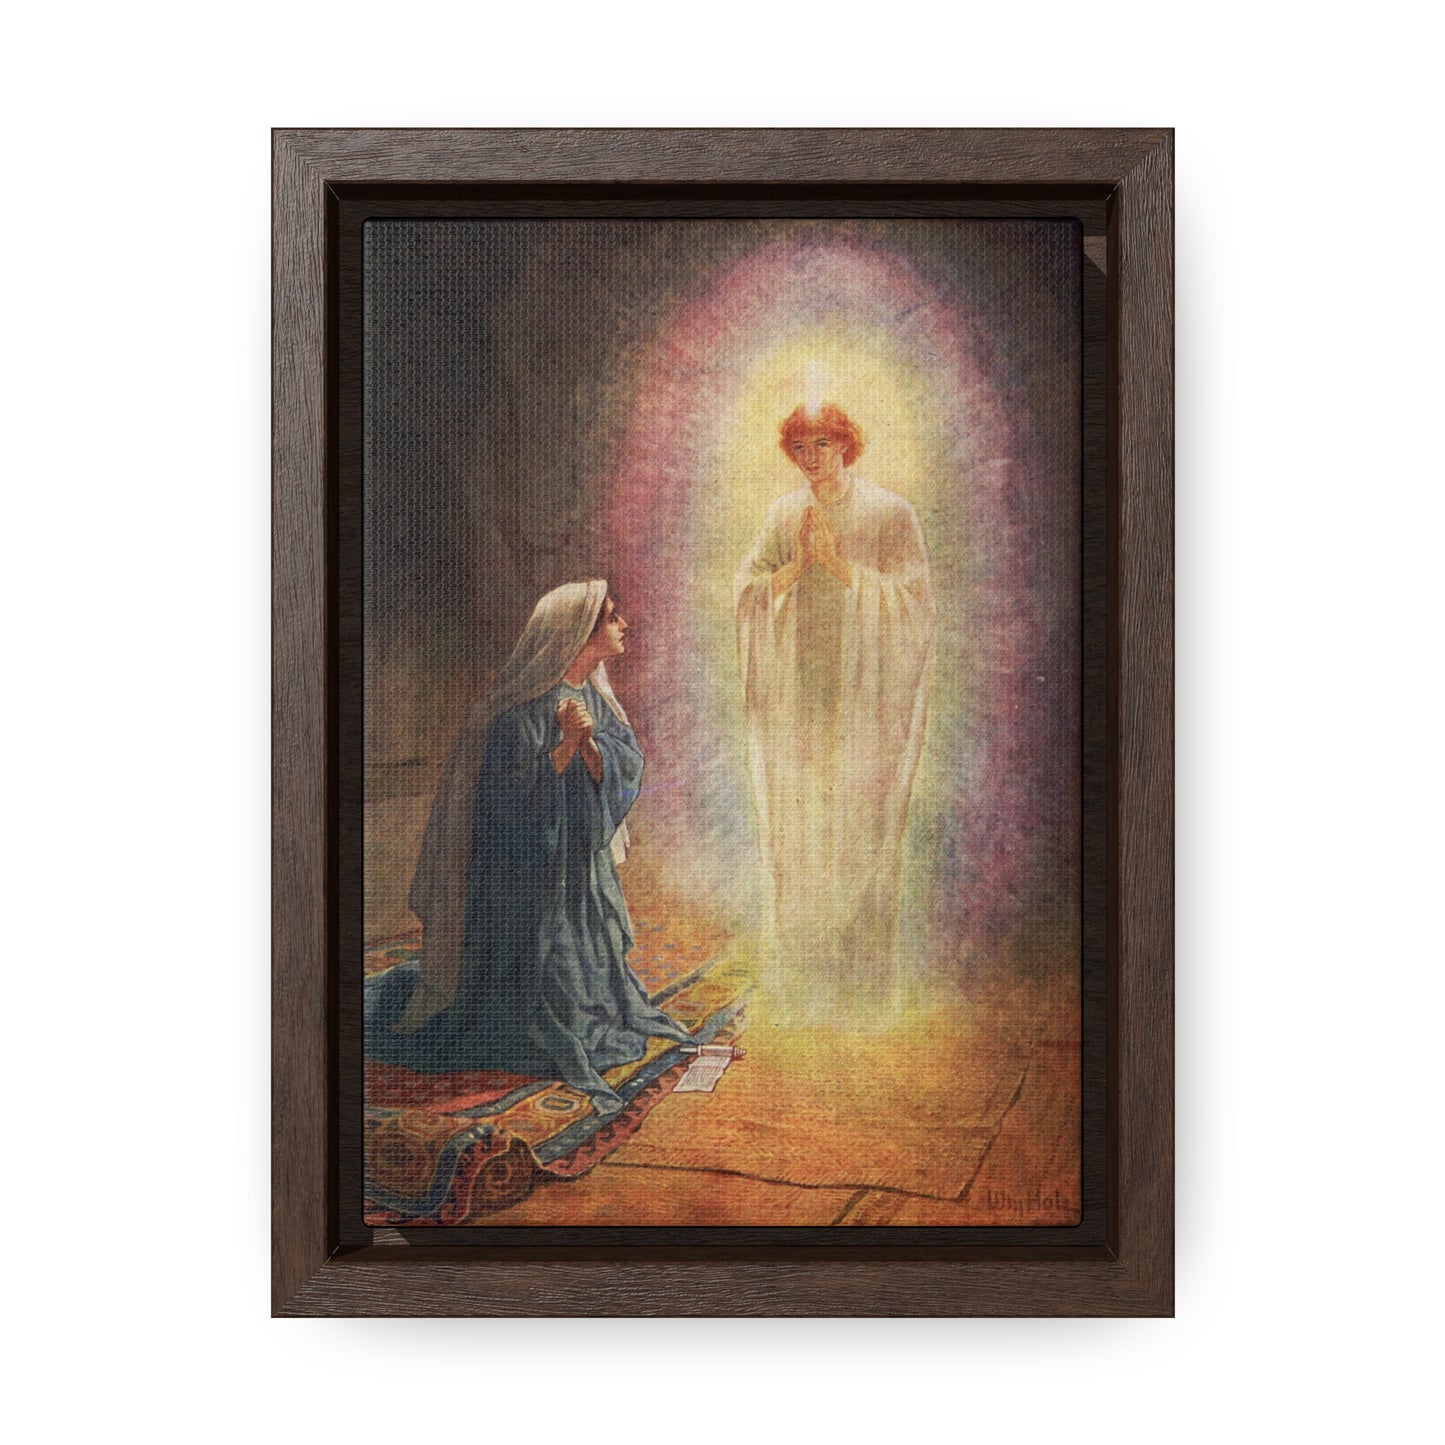 Annunciation Framed, Gallery Wrapped Canvas - 5"x7" - Studio Lams Creative Collective